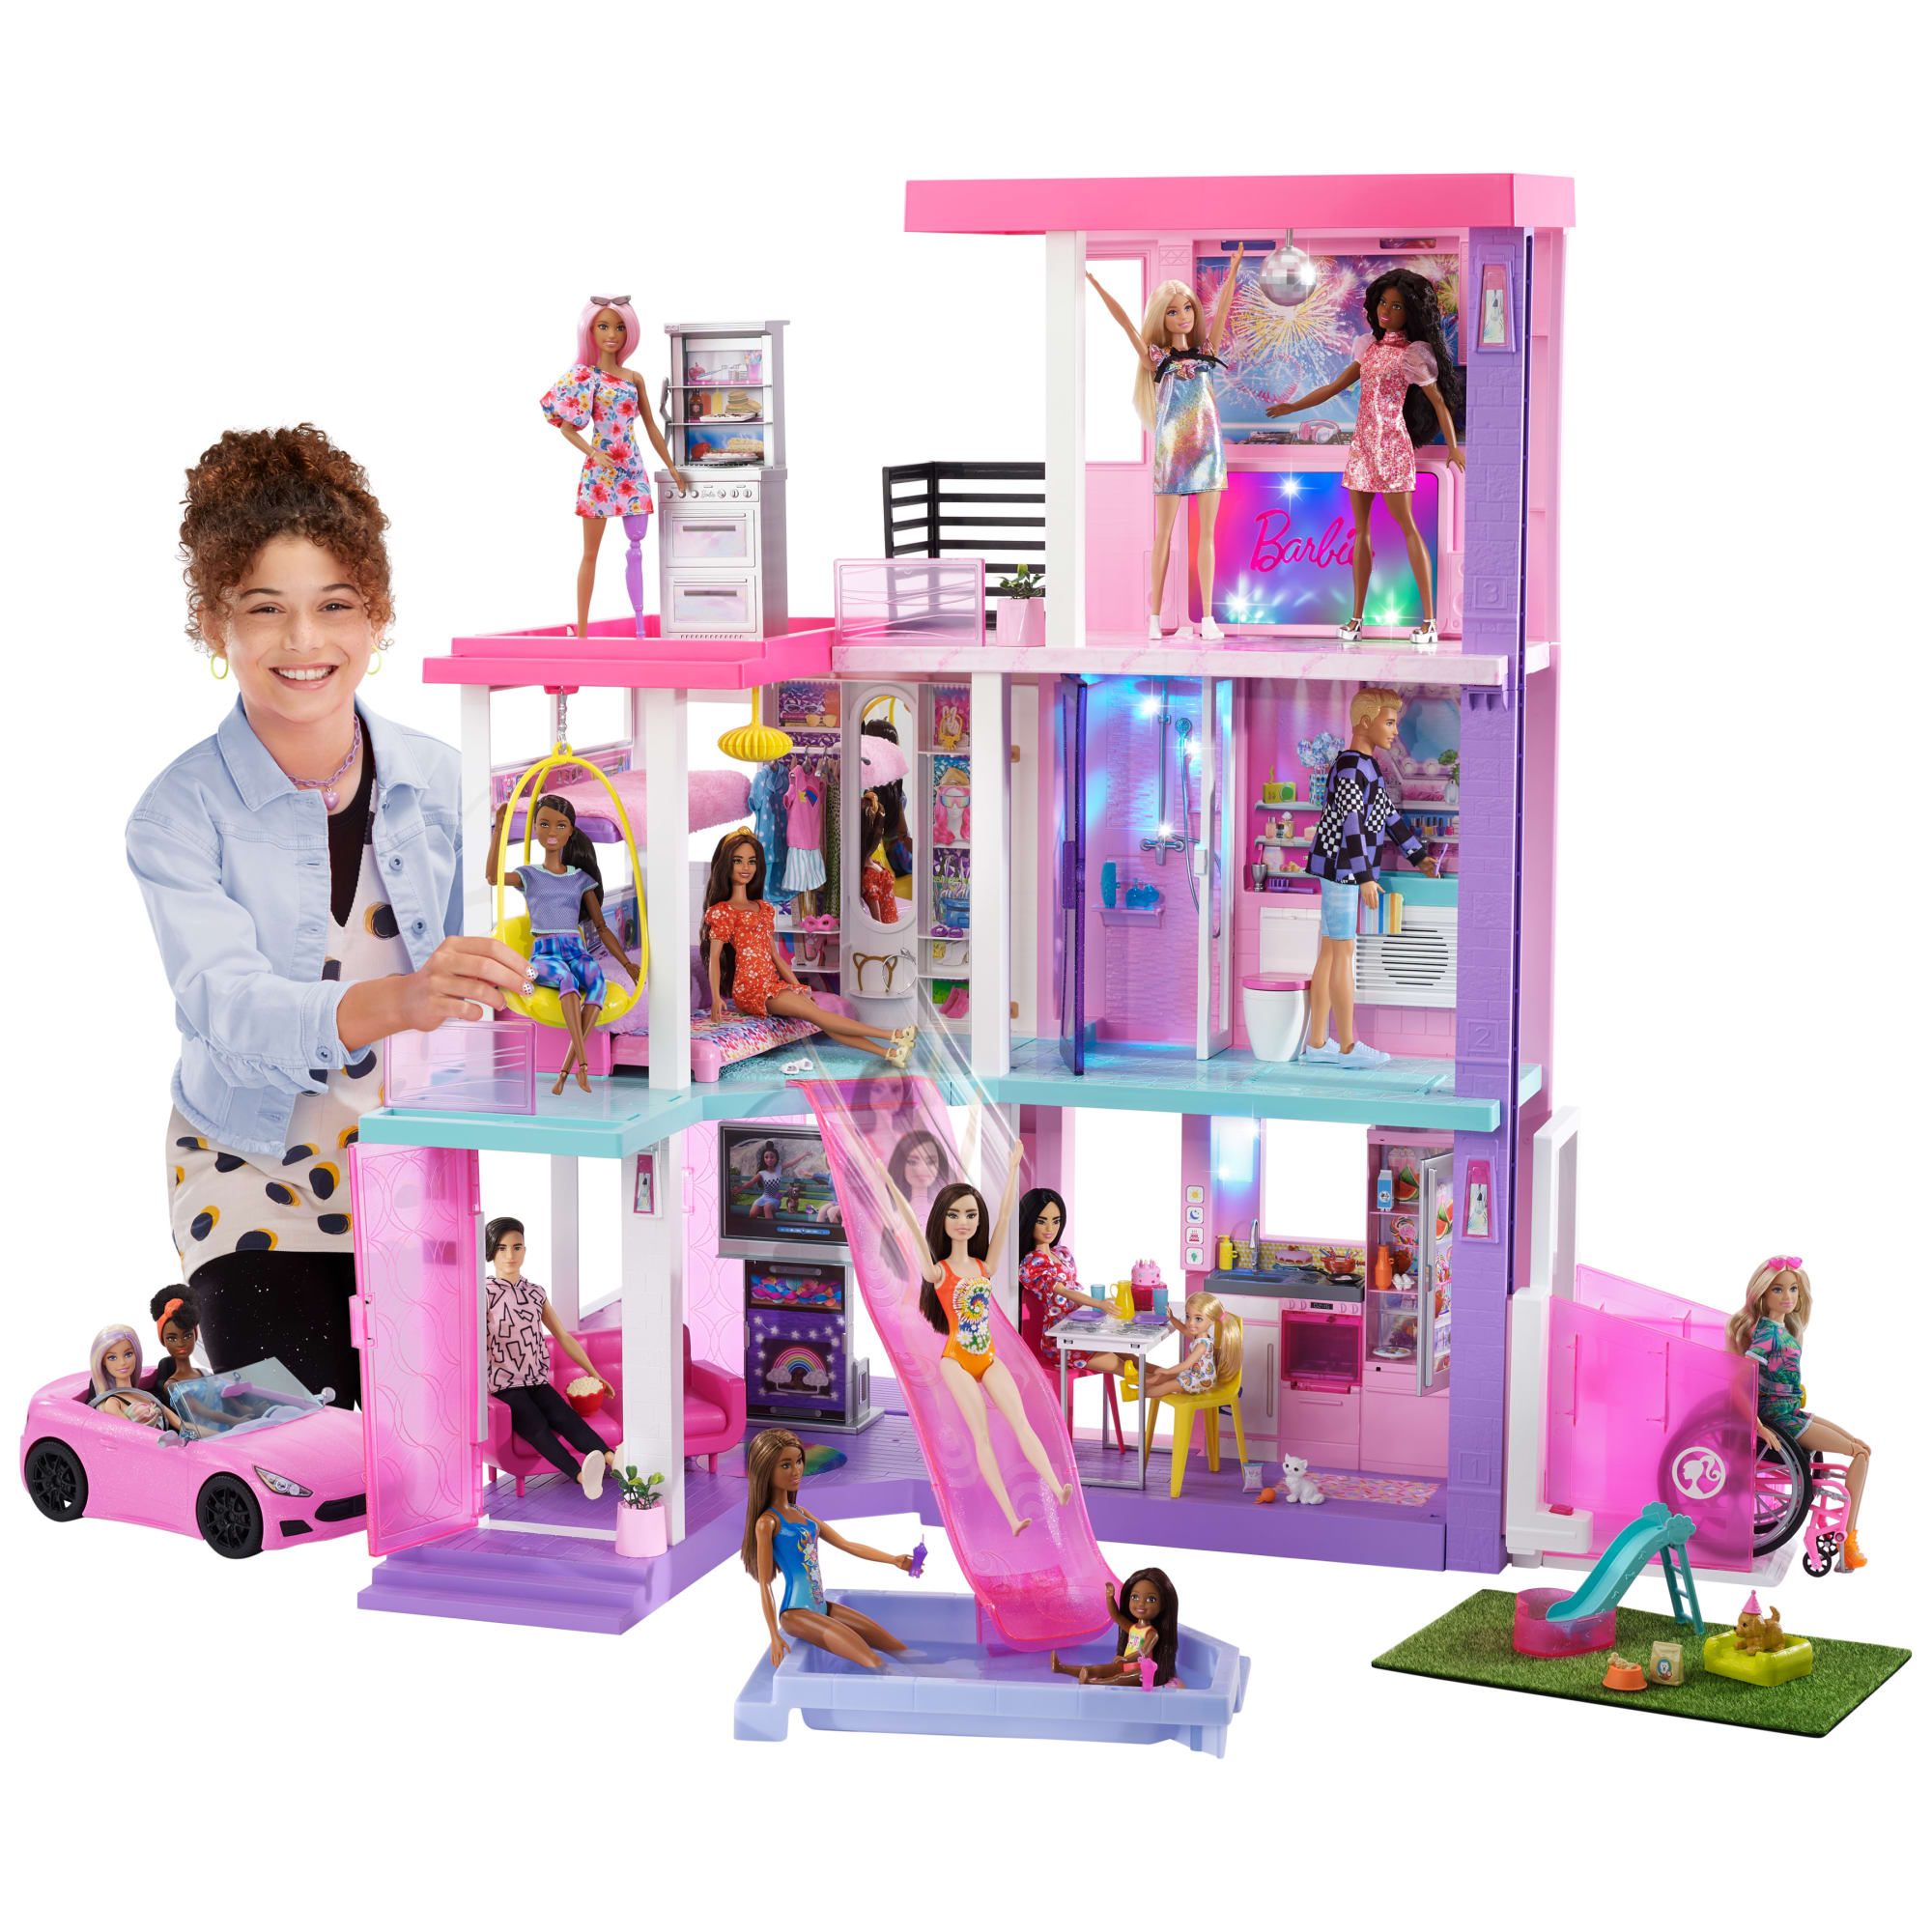 Most Popular Barbie Toys: Barbie Stories with Barbie House, Barbie Car,  Barbie Camper, Chelsea Toys 